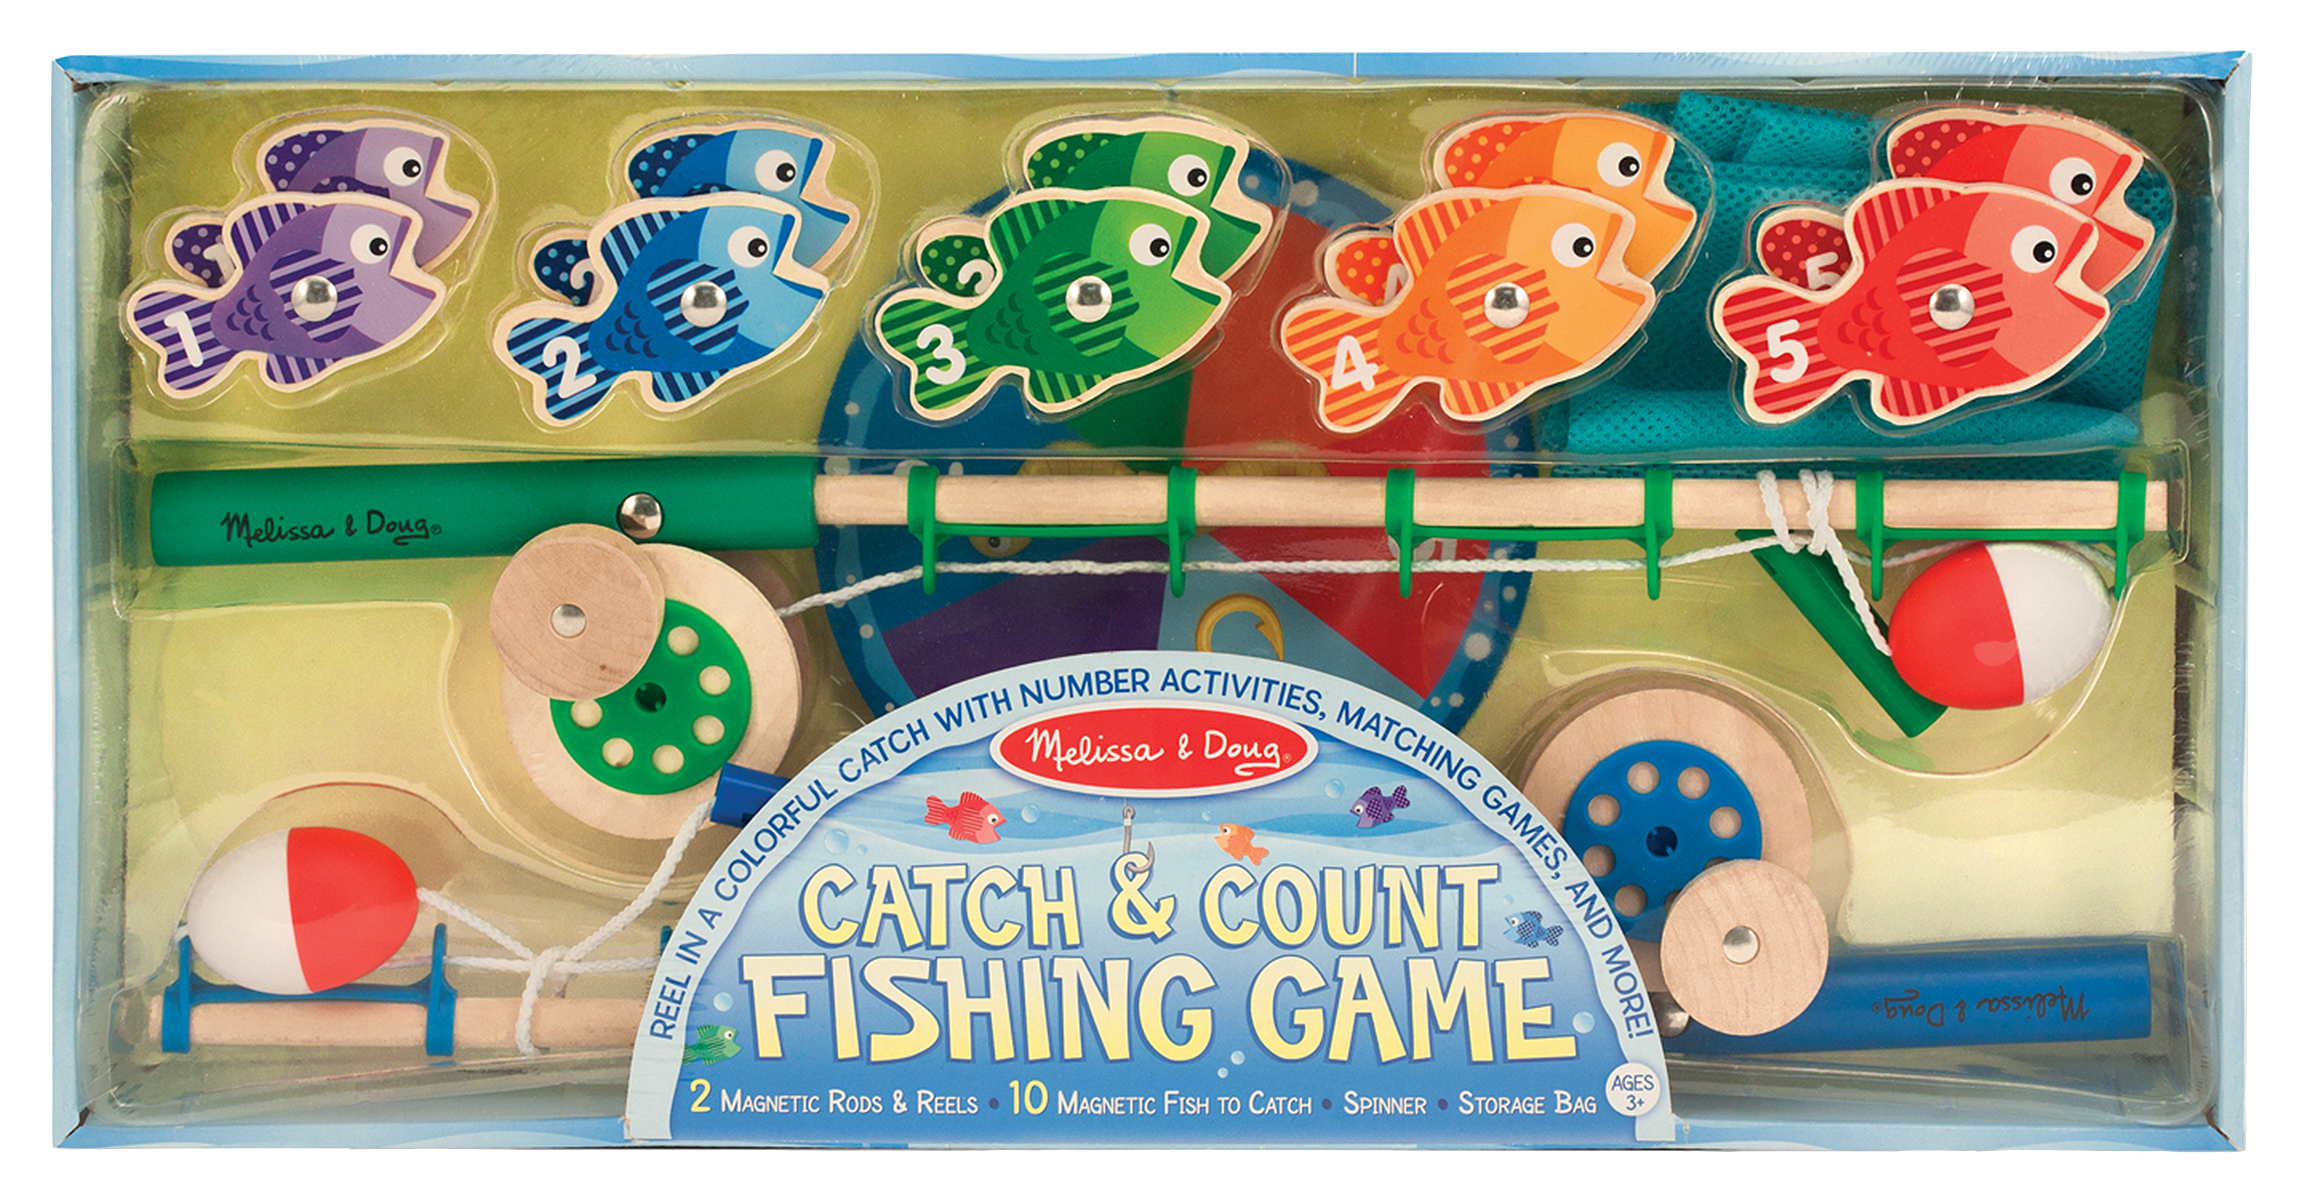 Melissa & Doug Let's Explore Fishing Play Set – 21 Pieces - Toy Fishing Set  For Toddlers And Kids